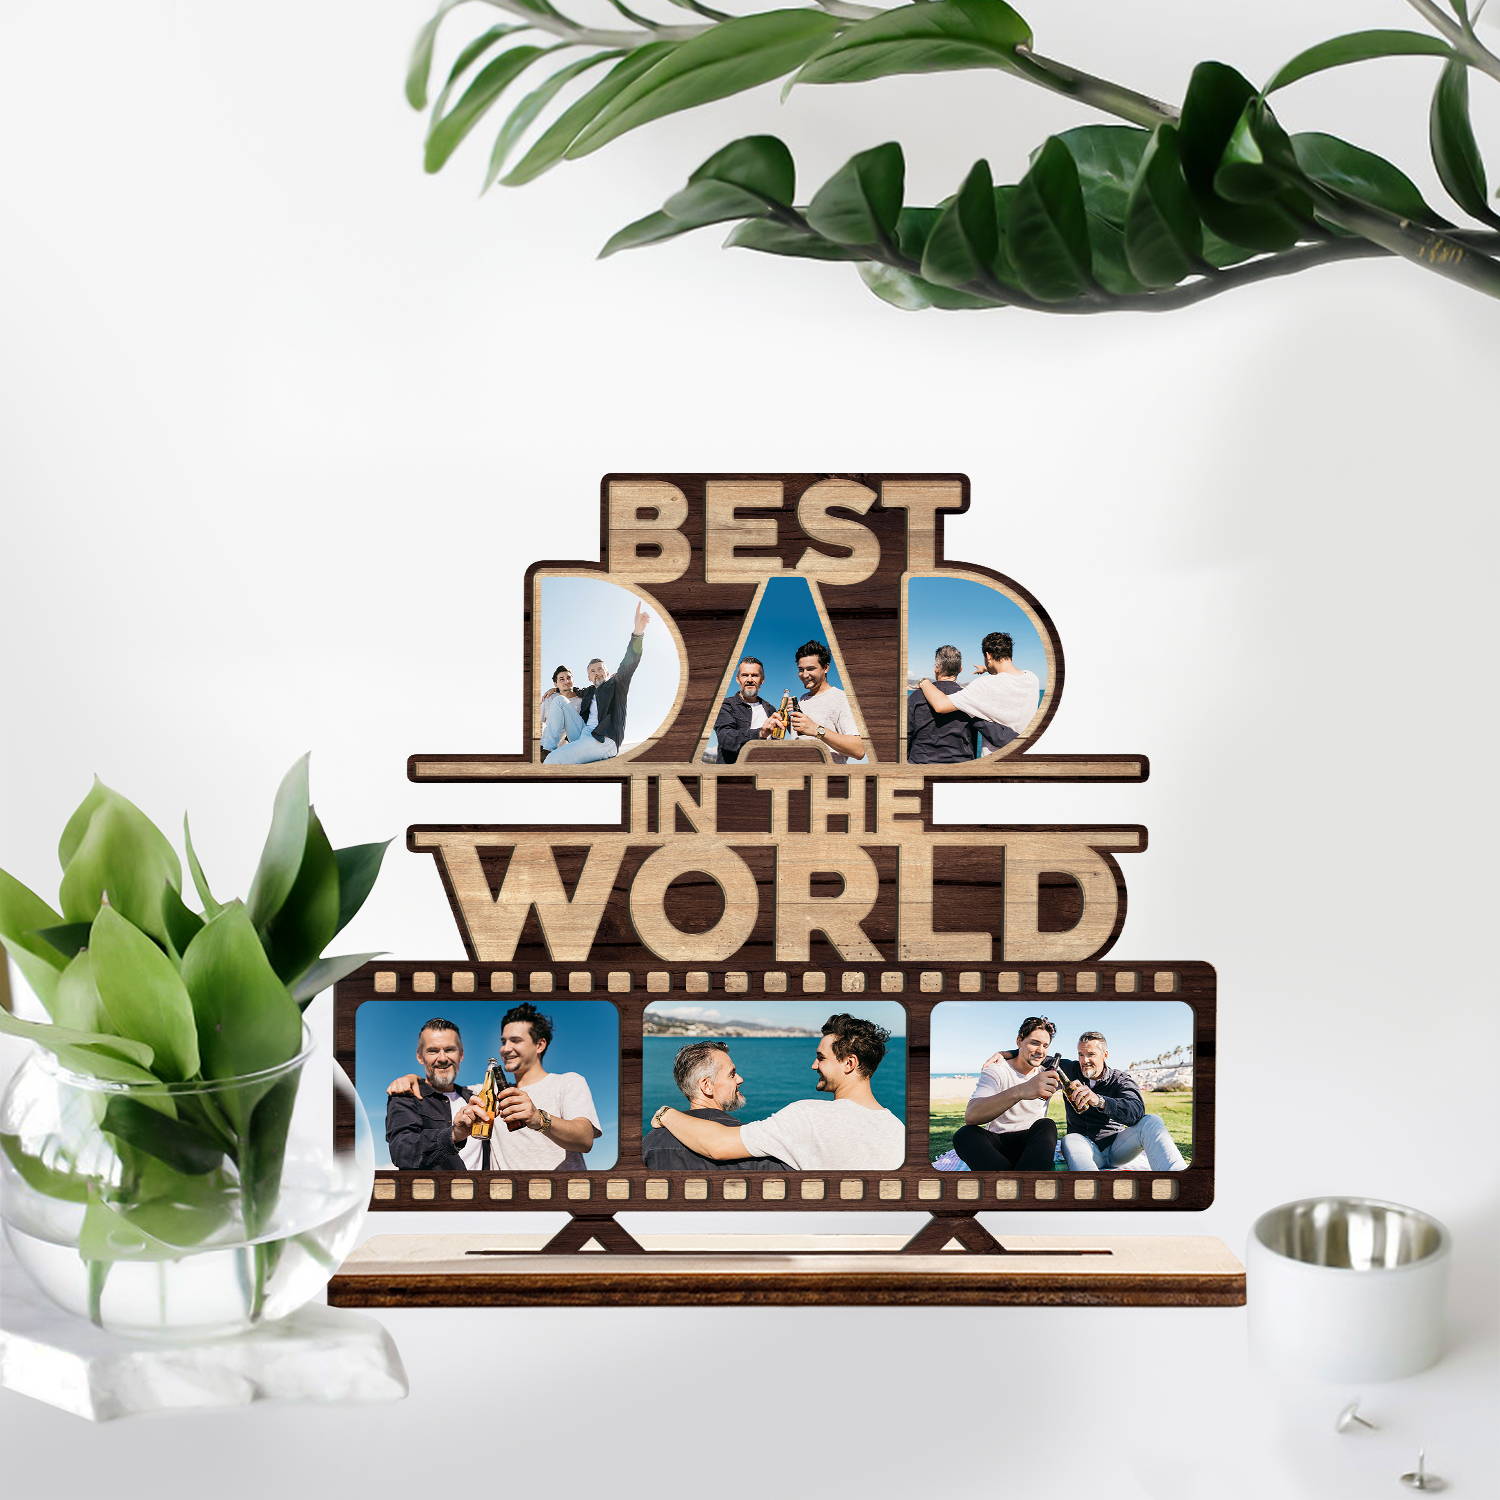 This 3 Layer Wooden Plaque is customized with 6 photos of your beer daddy. With the quote "Best Dad In The World", this gift is sure to melt his heart.